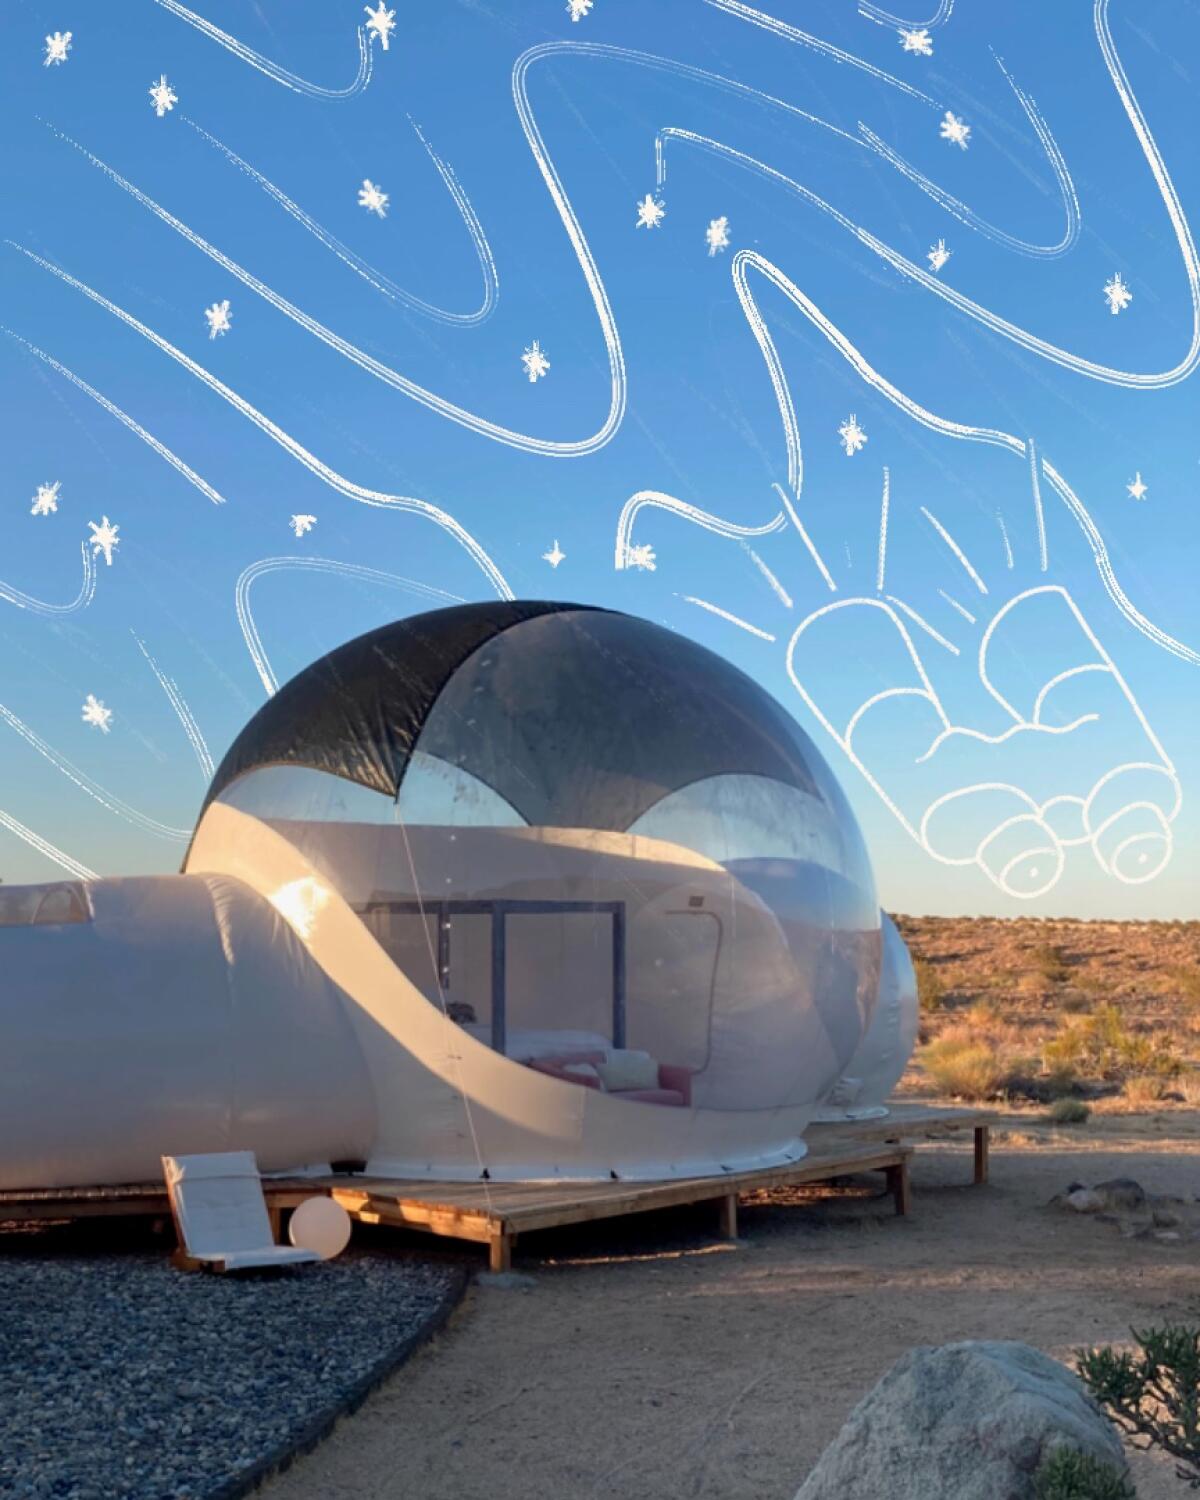 This off-the-grid bubble-house offers you all the views a Joshua Tree night sky has to offer, with all the indoor comfort.